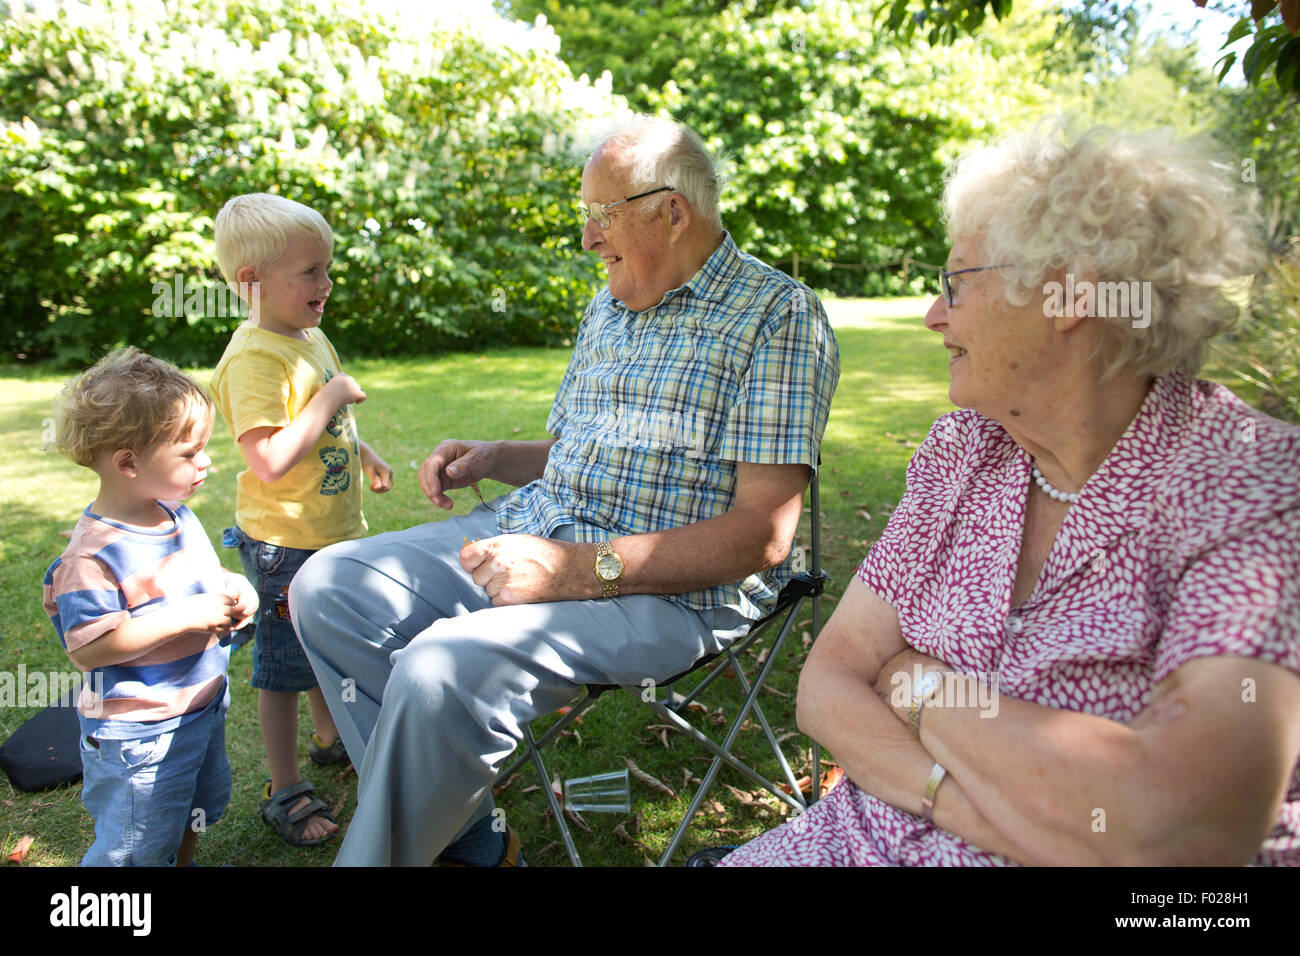 Grandparents, old age pensioners out in the sunshine, with younger generations of their family, England, UK Stock Photo